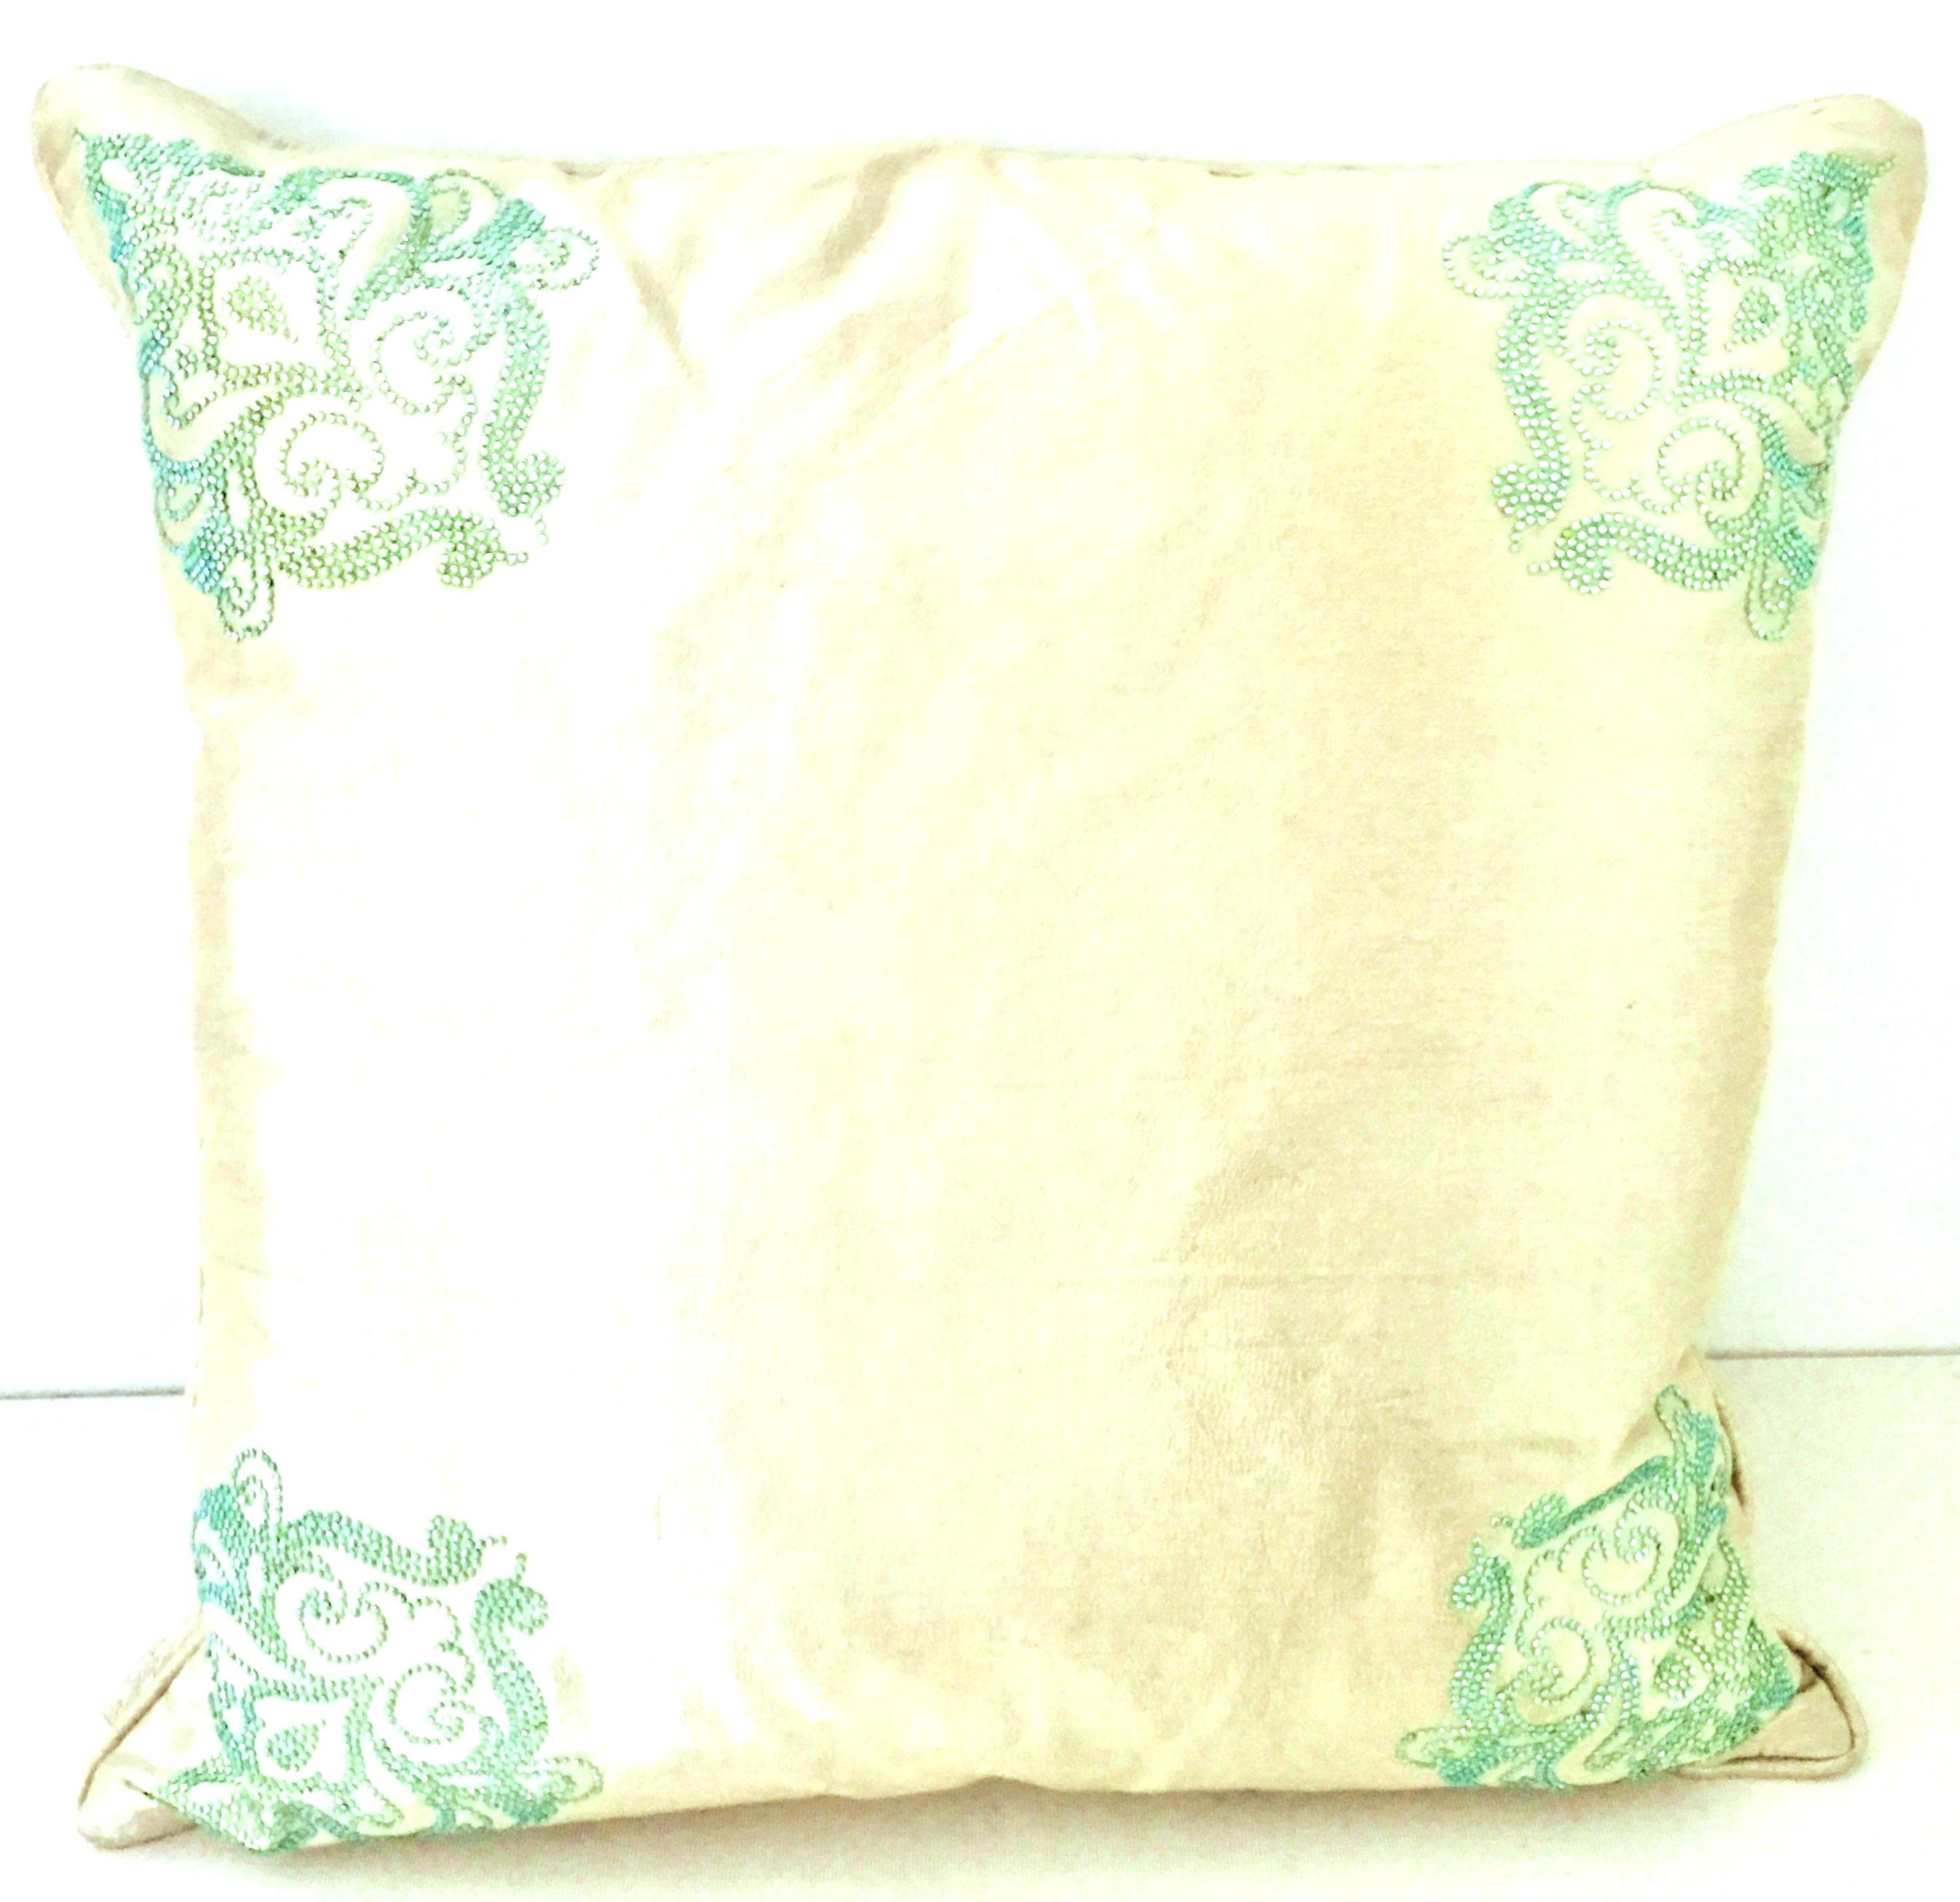 21st Century & New Stunning contemporary silk pillow in off-white with a paisley adorned green and turquoise Swarovski crystal rhinestone pattern at all four corners. Includes a down/feather cotton covered insert. Features a hidden zipper for easy